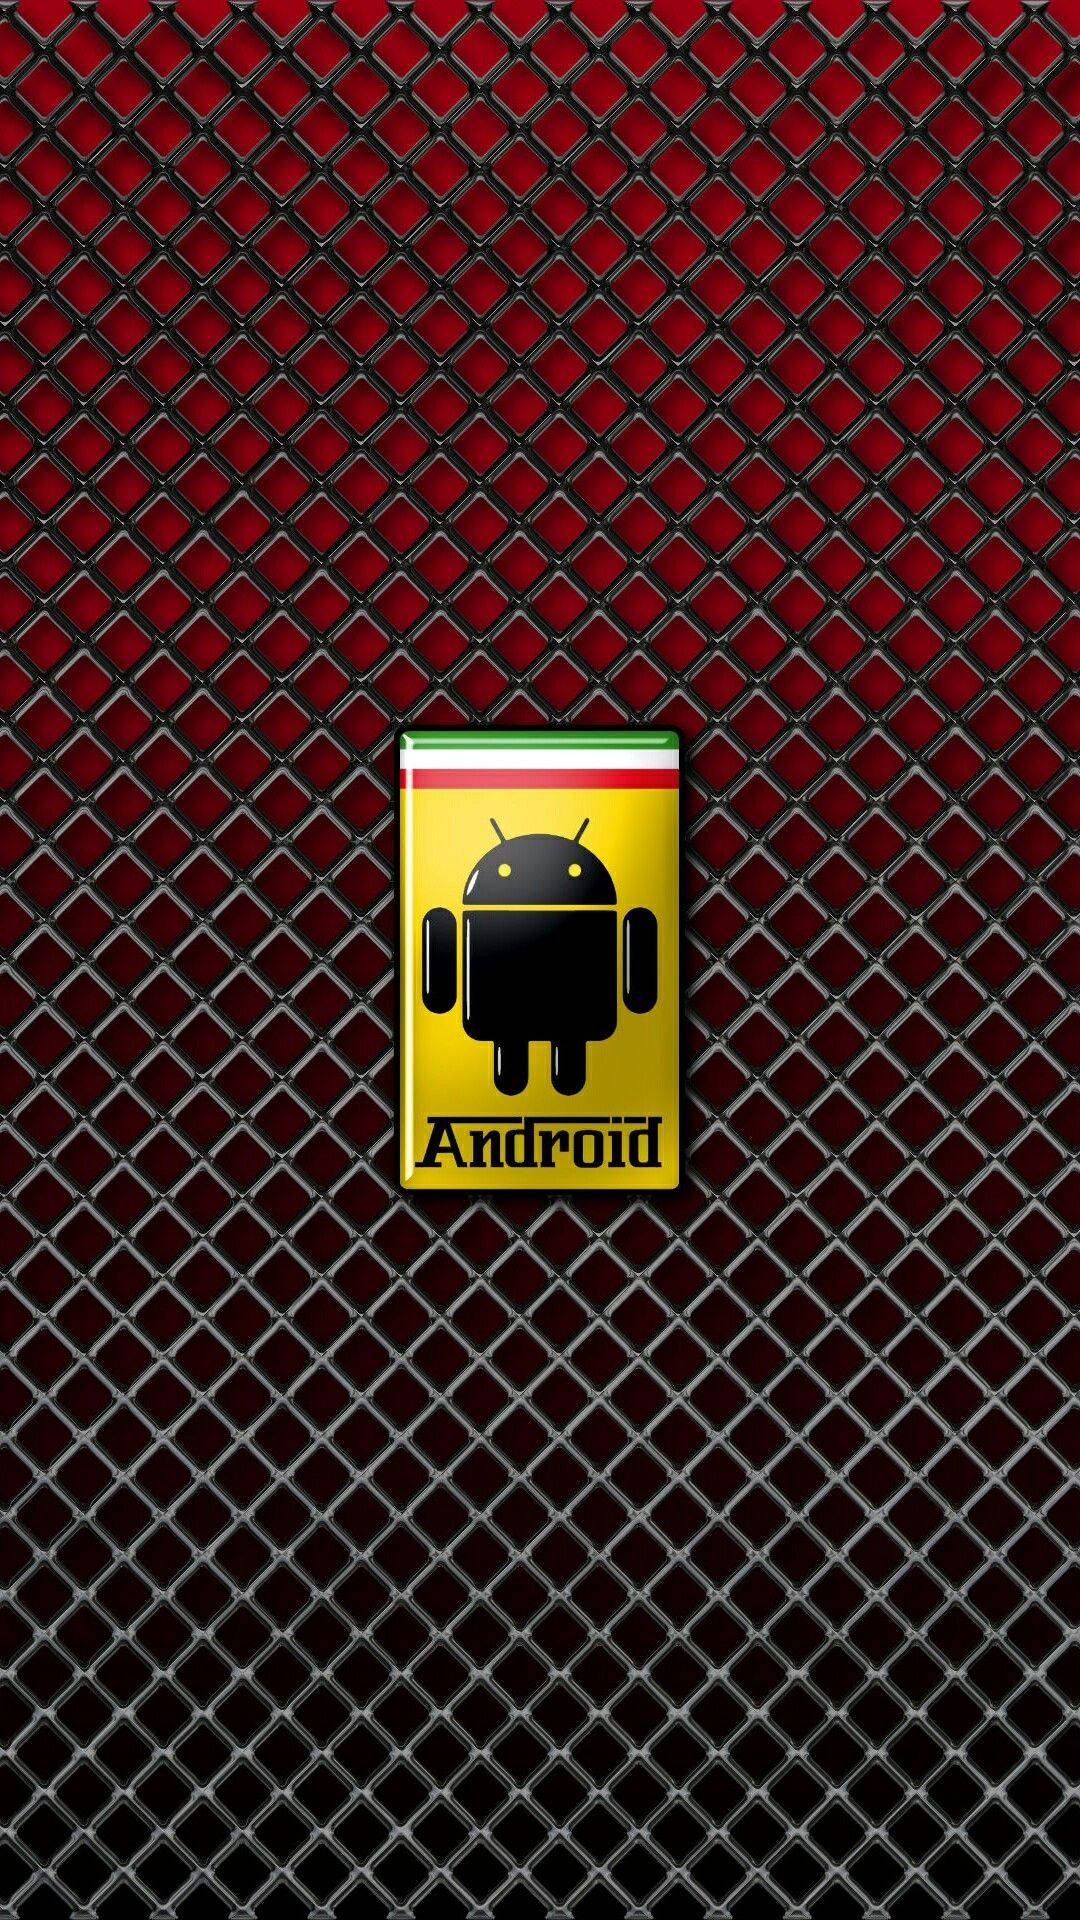 Android Developer With Screened Background Wallpaper